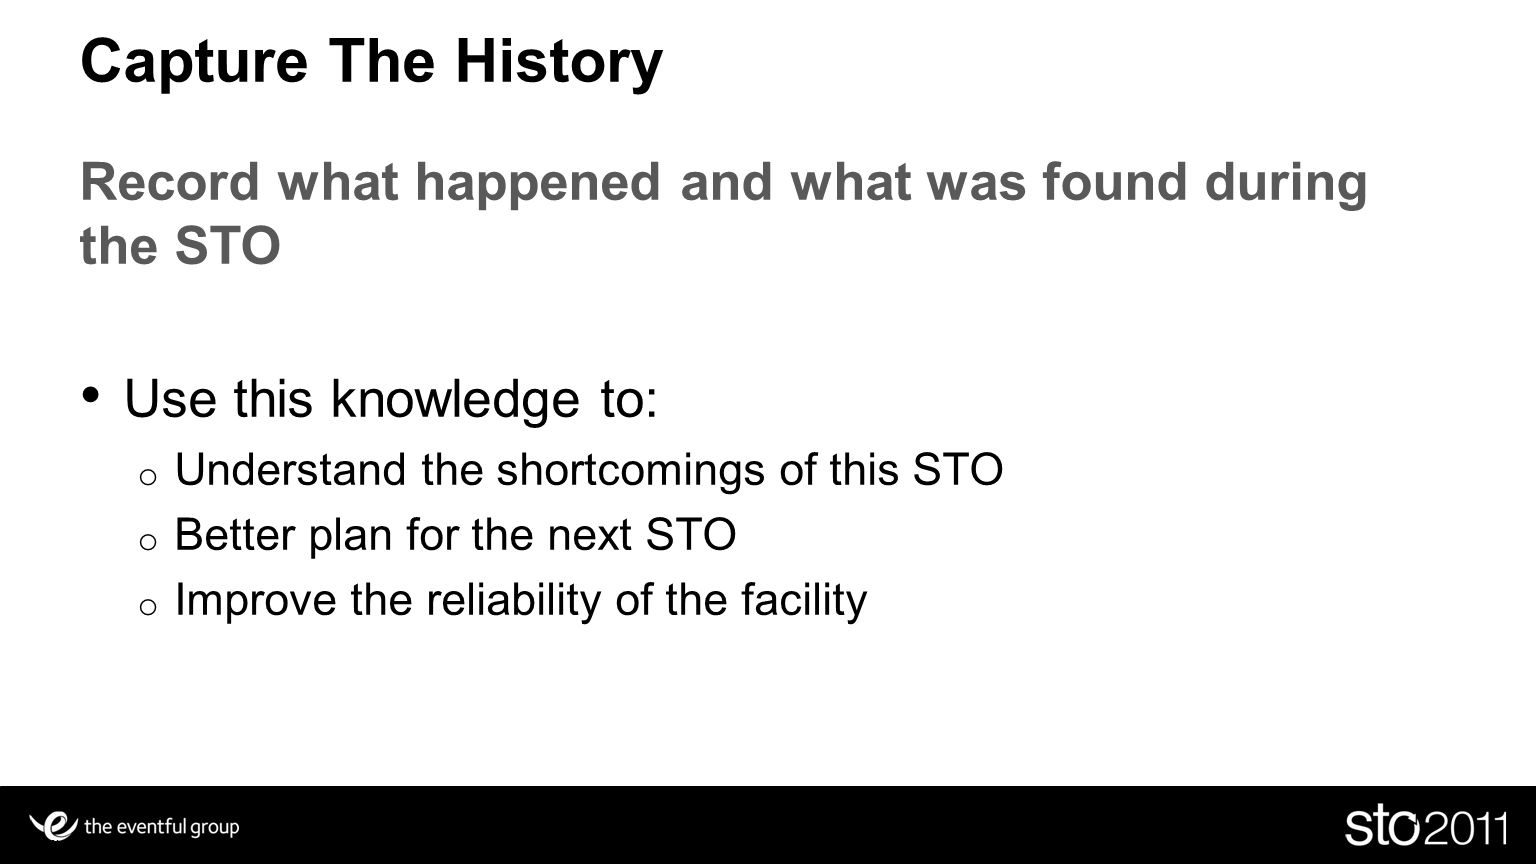 Slide 16 Capture The History Record what happened and what was found during the STO Use this knowledge to: o Understand the shortcomings of this STO o Better plan for the next STO o Improve the reliability of the facility